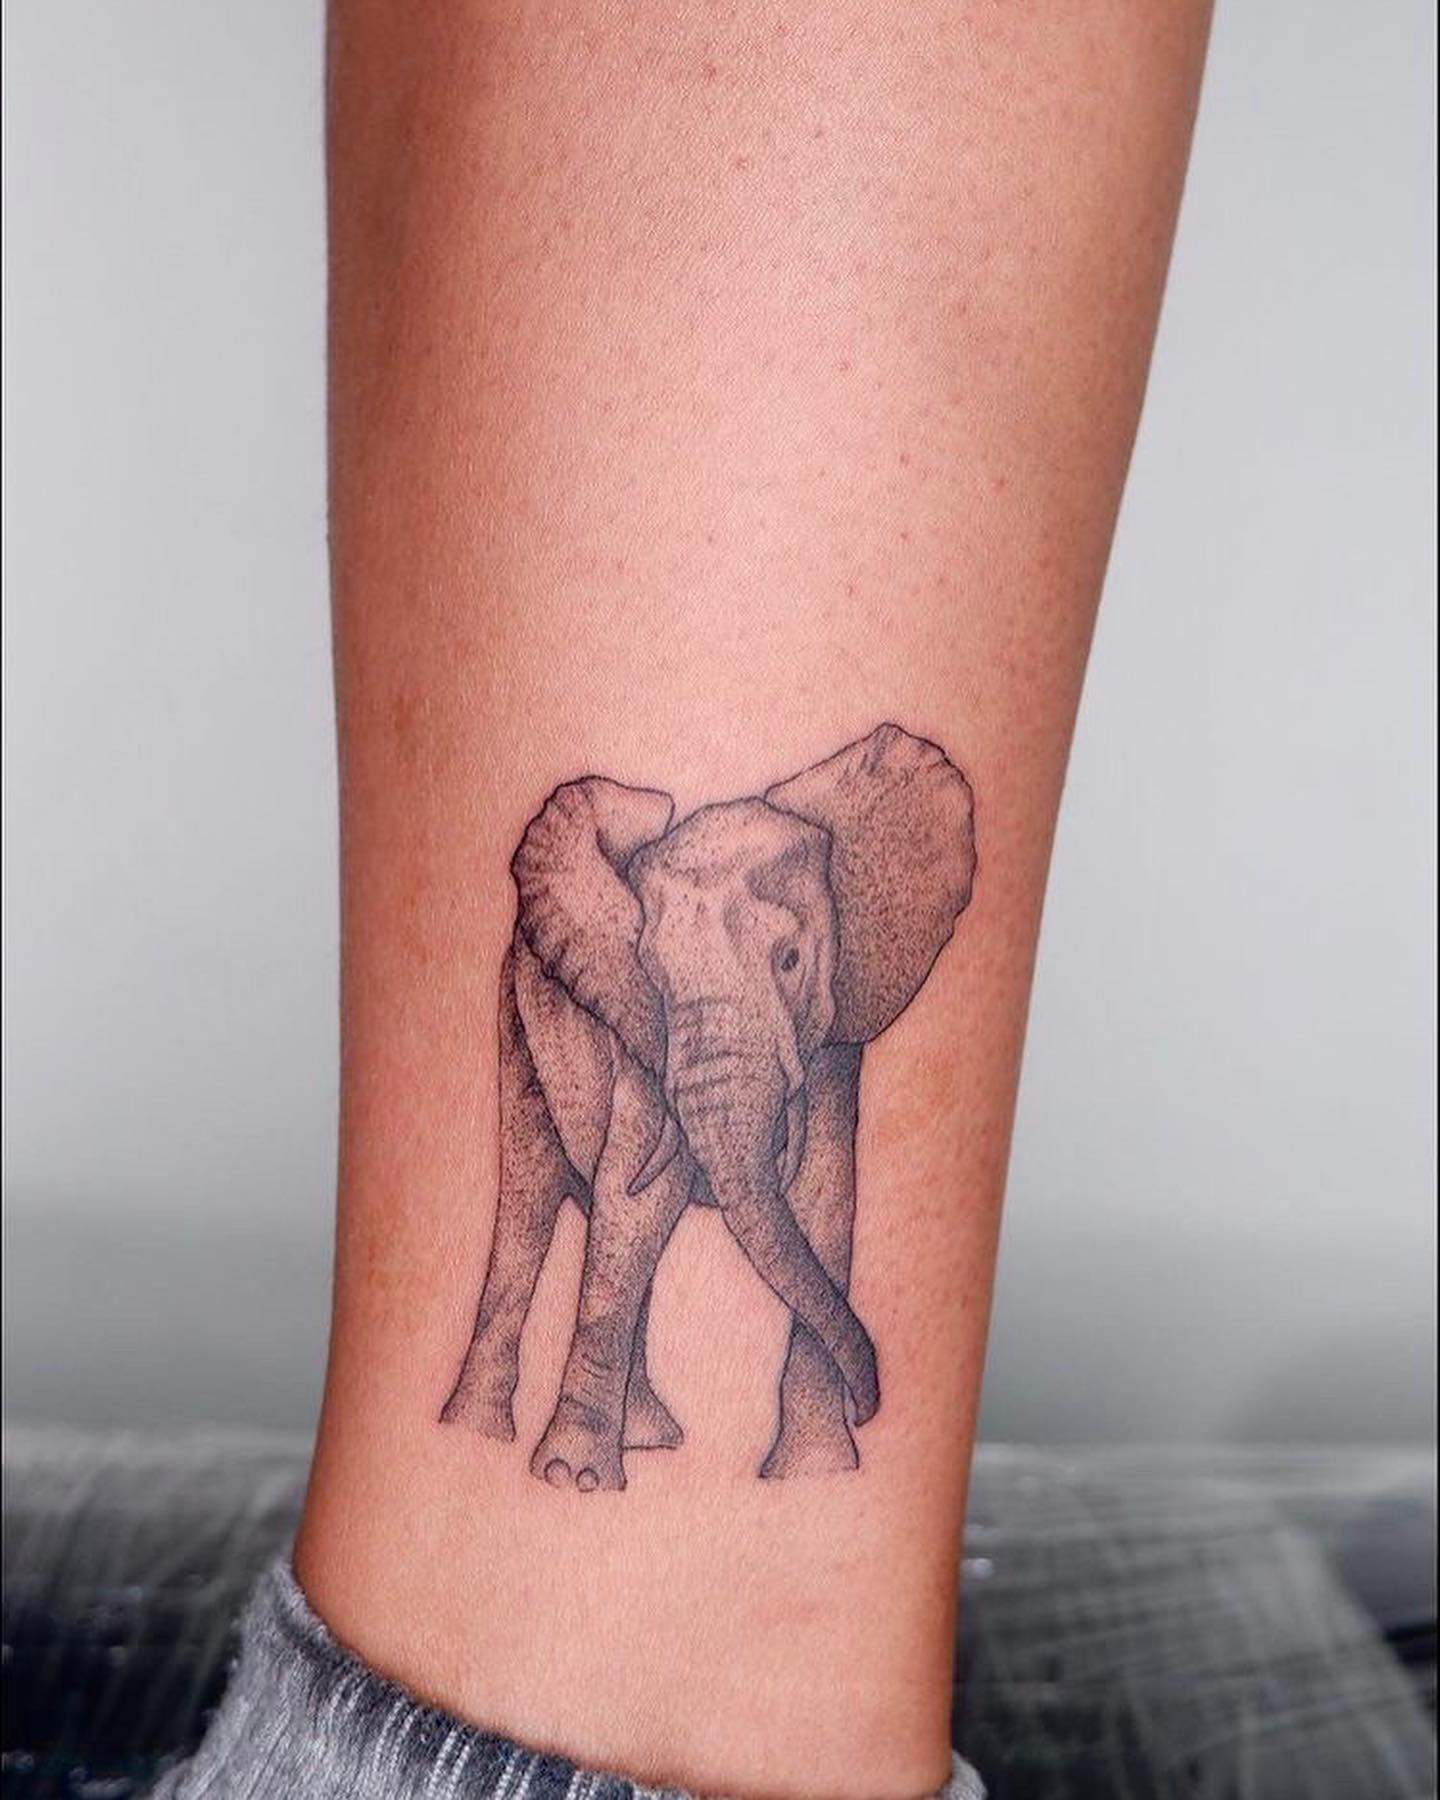 Elephants are used to show your inner connection and the way you see things and the life that passes by. If you’re deeply connected with your human and animal nature, try out this black elephant on your ankle.